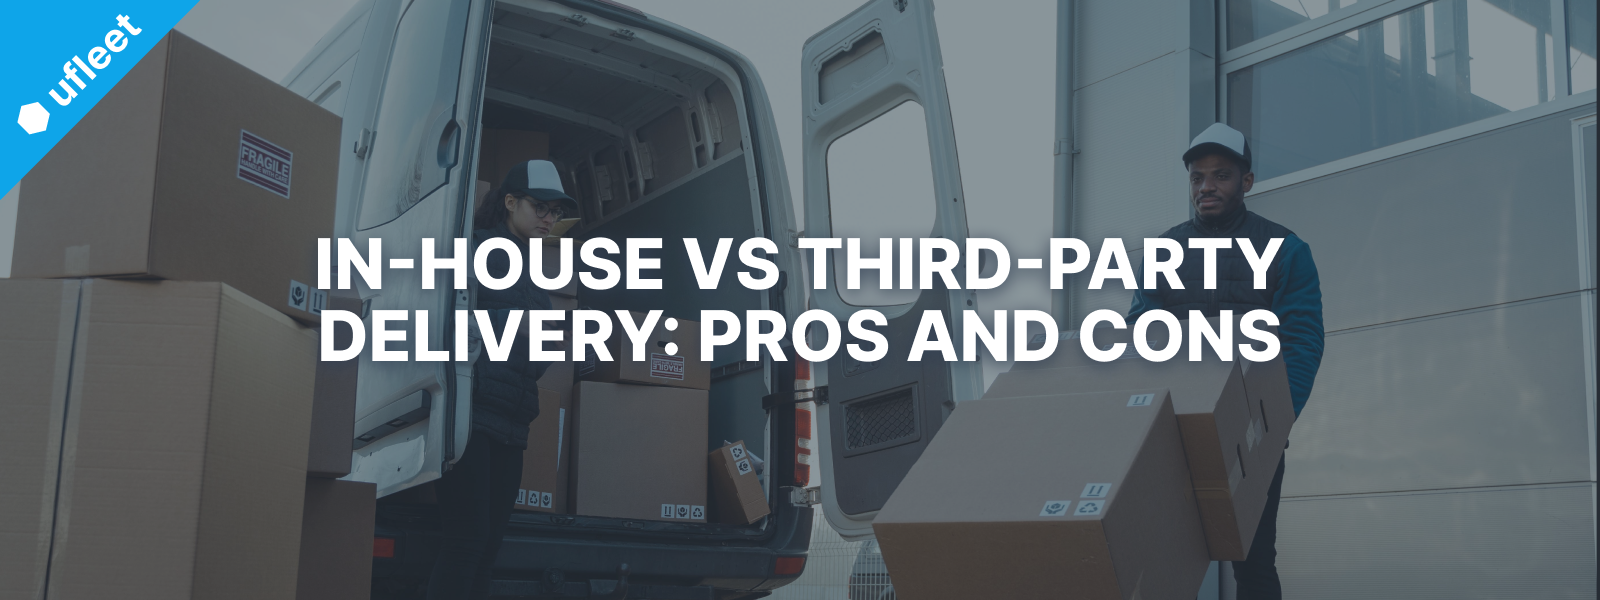 in-house vs third-party delivery